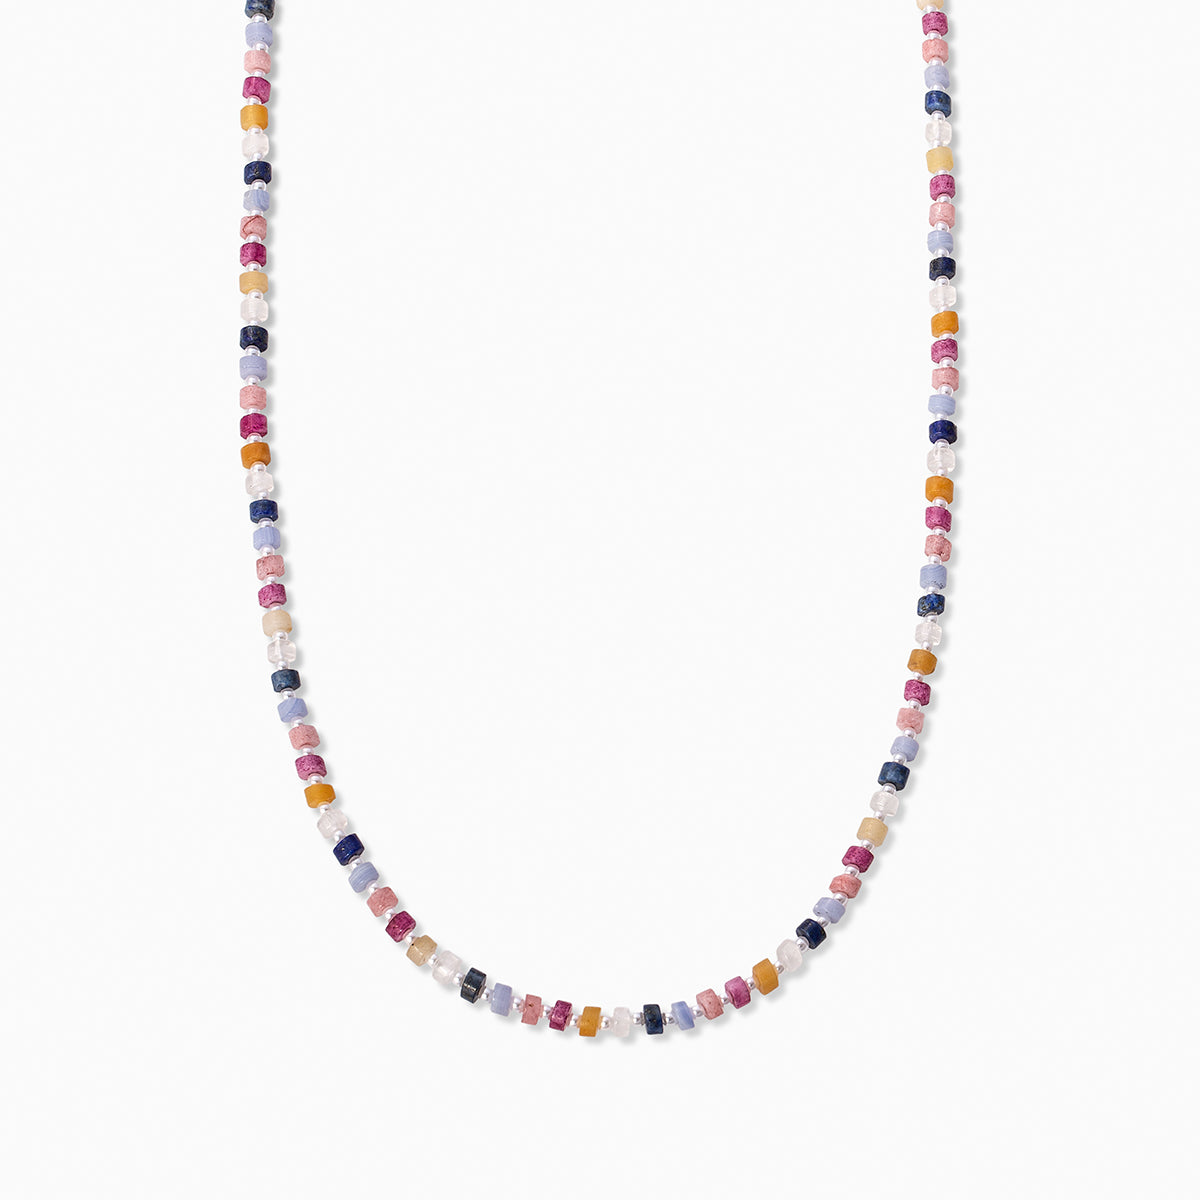 Colored Bead Necklace | Gold | Product Image | Uncommon James